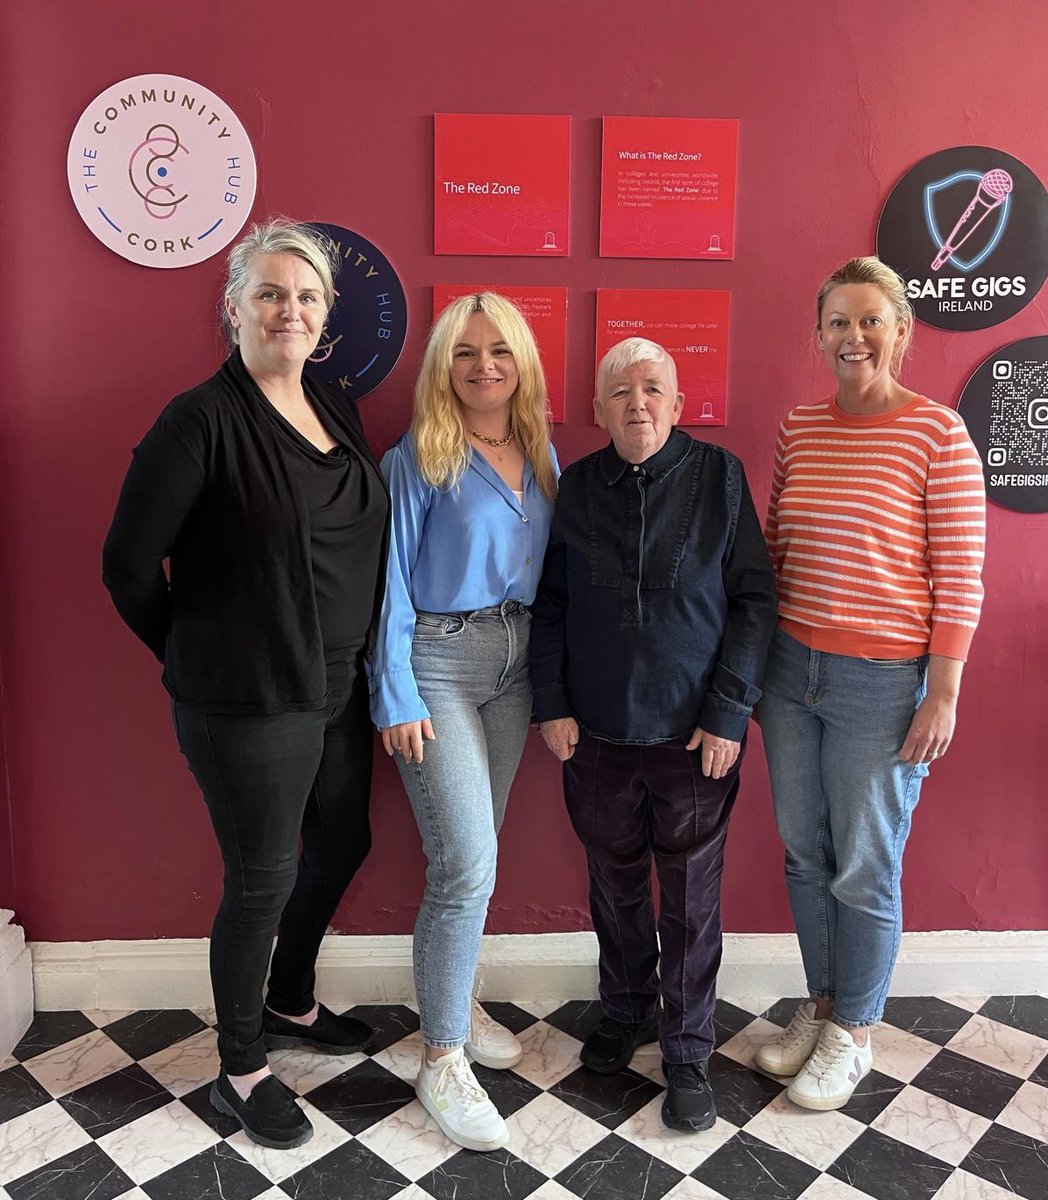 Roadtrip! Our CEO Rachel Morrogh was in #Cork this week to meet with Mary Crilly & the fantastic team at @SVCCork 💜